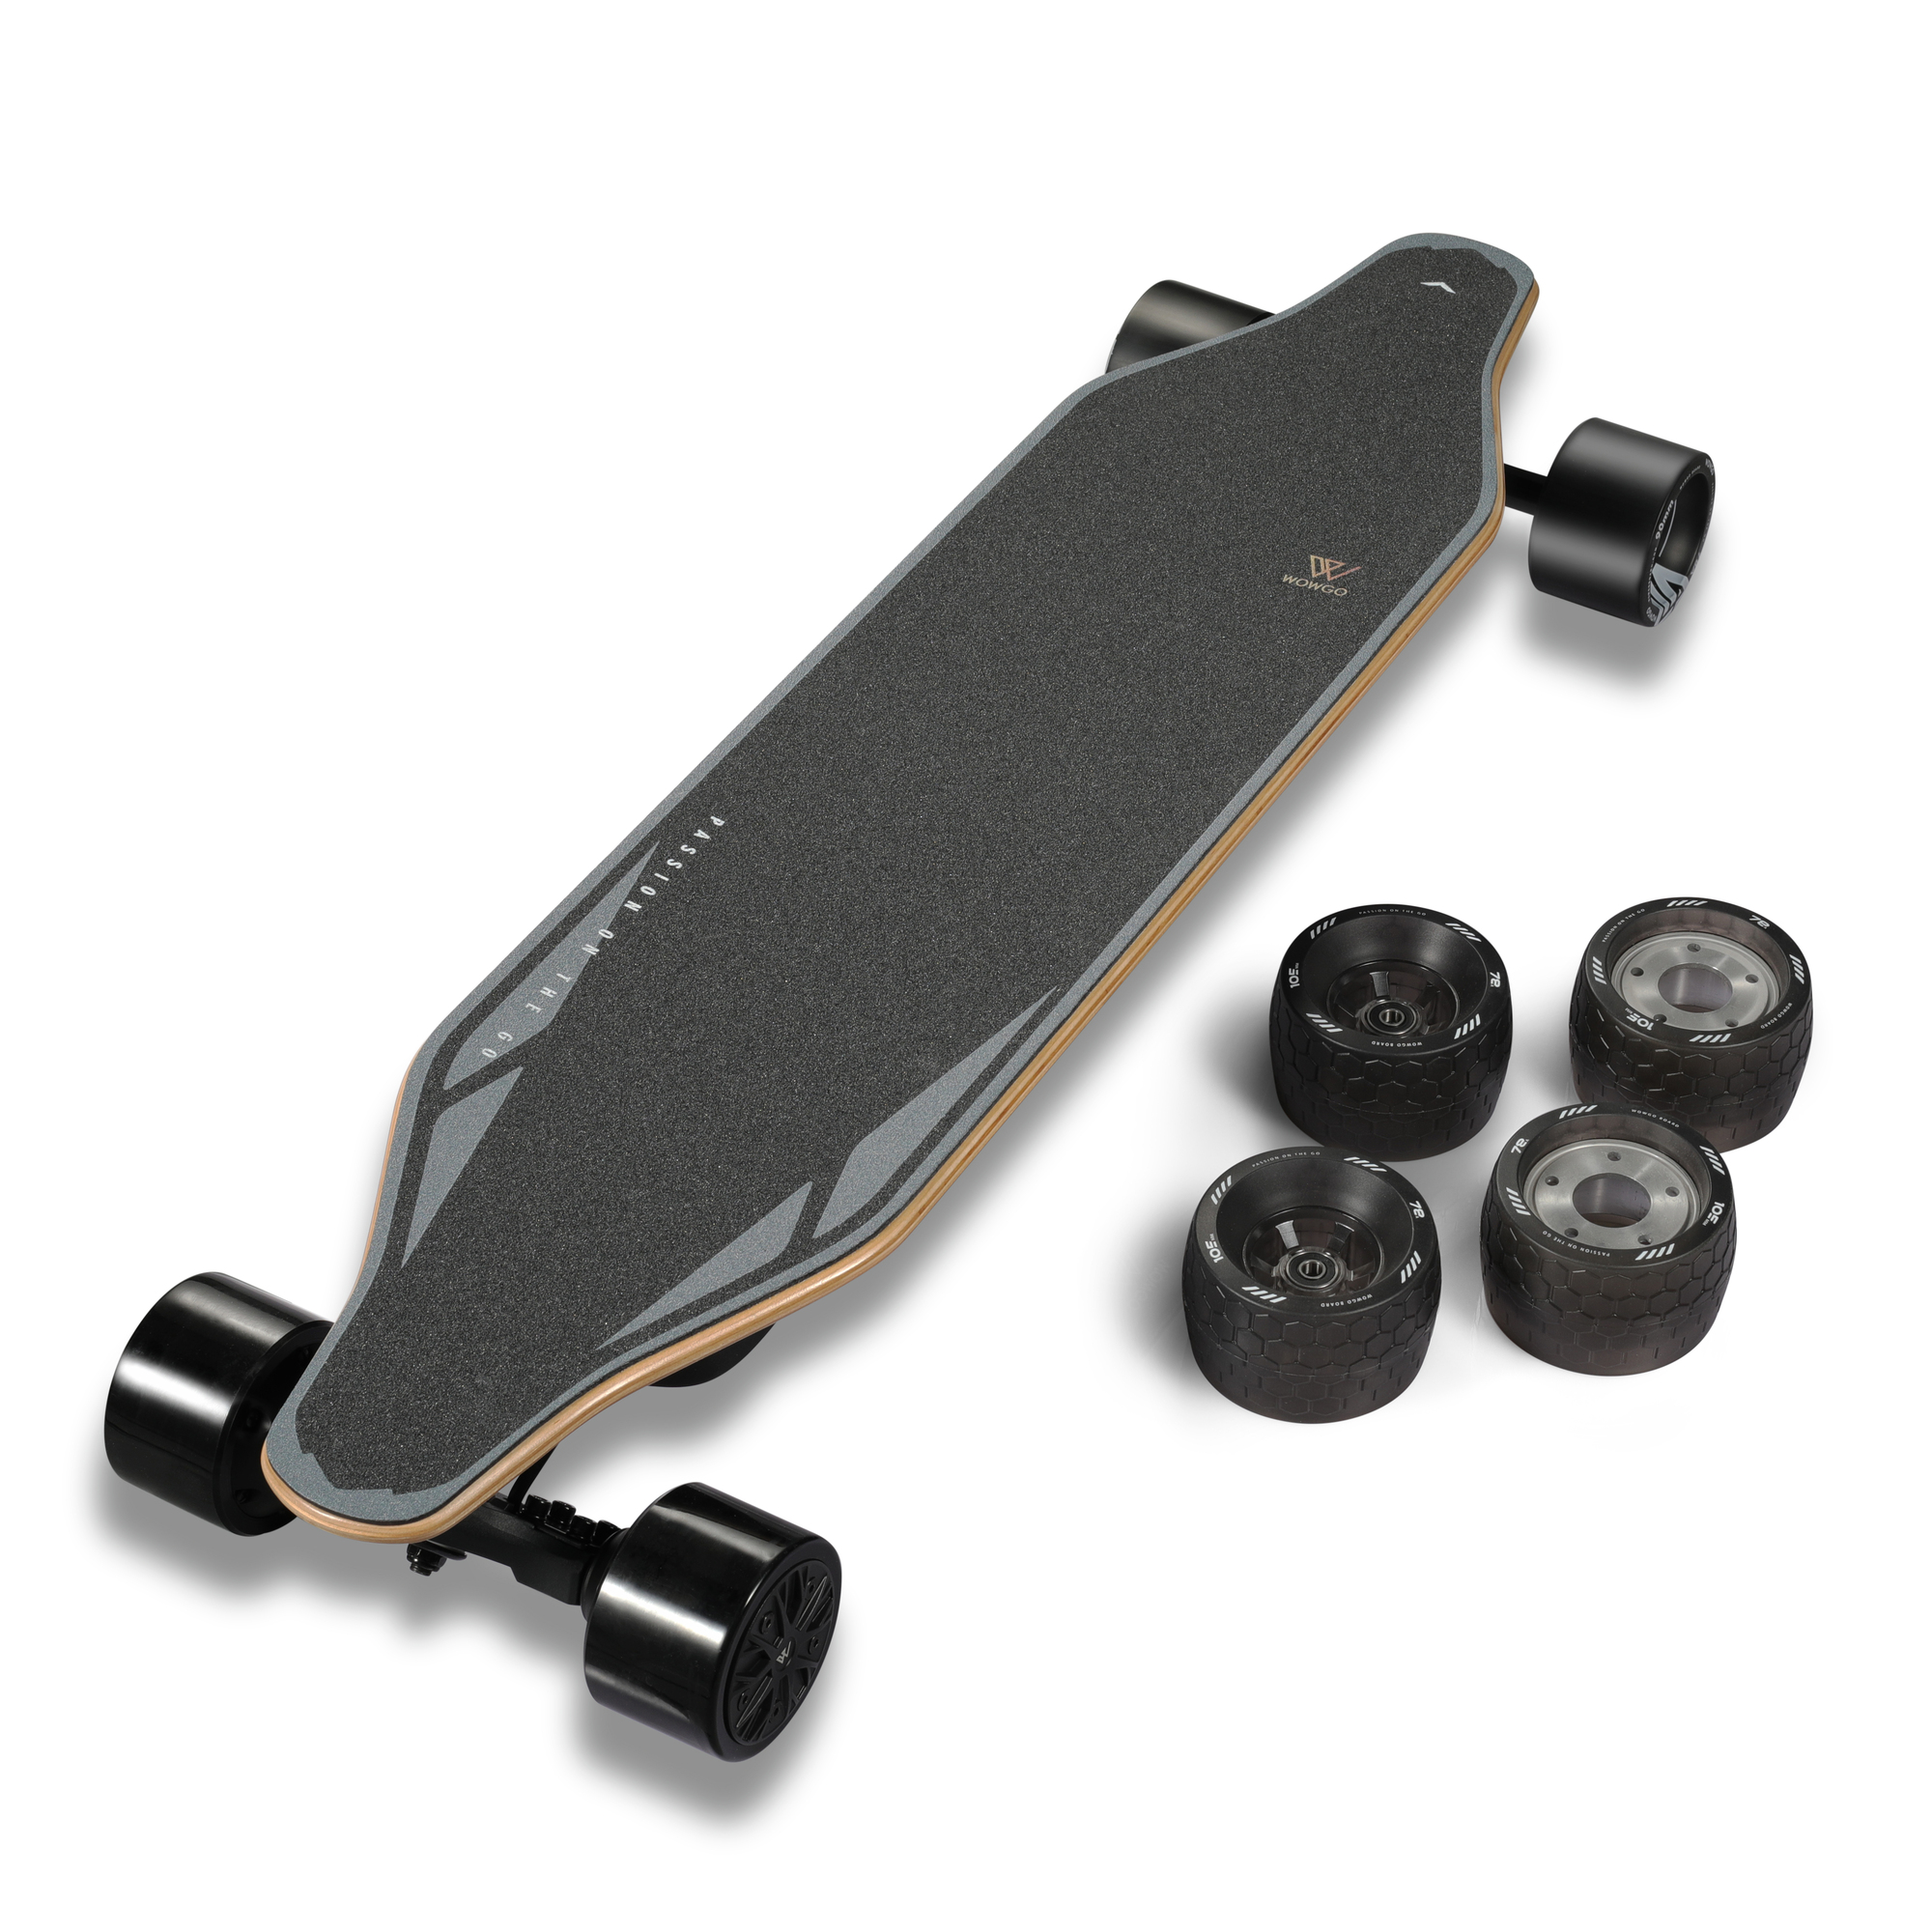 Wowgo 2s max 2 in 1 electric skateboard 